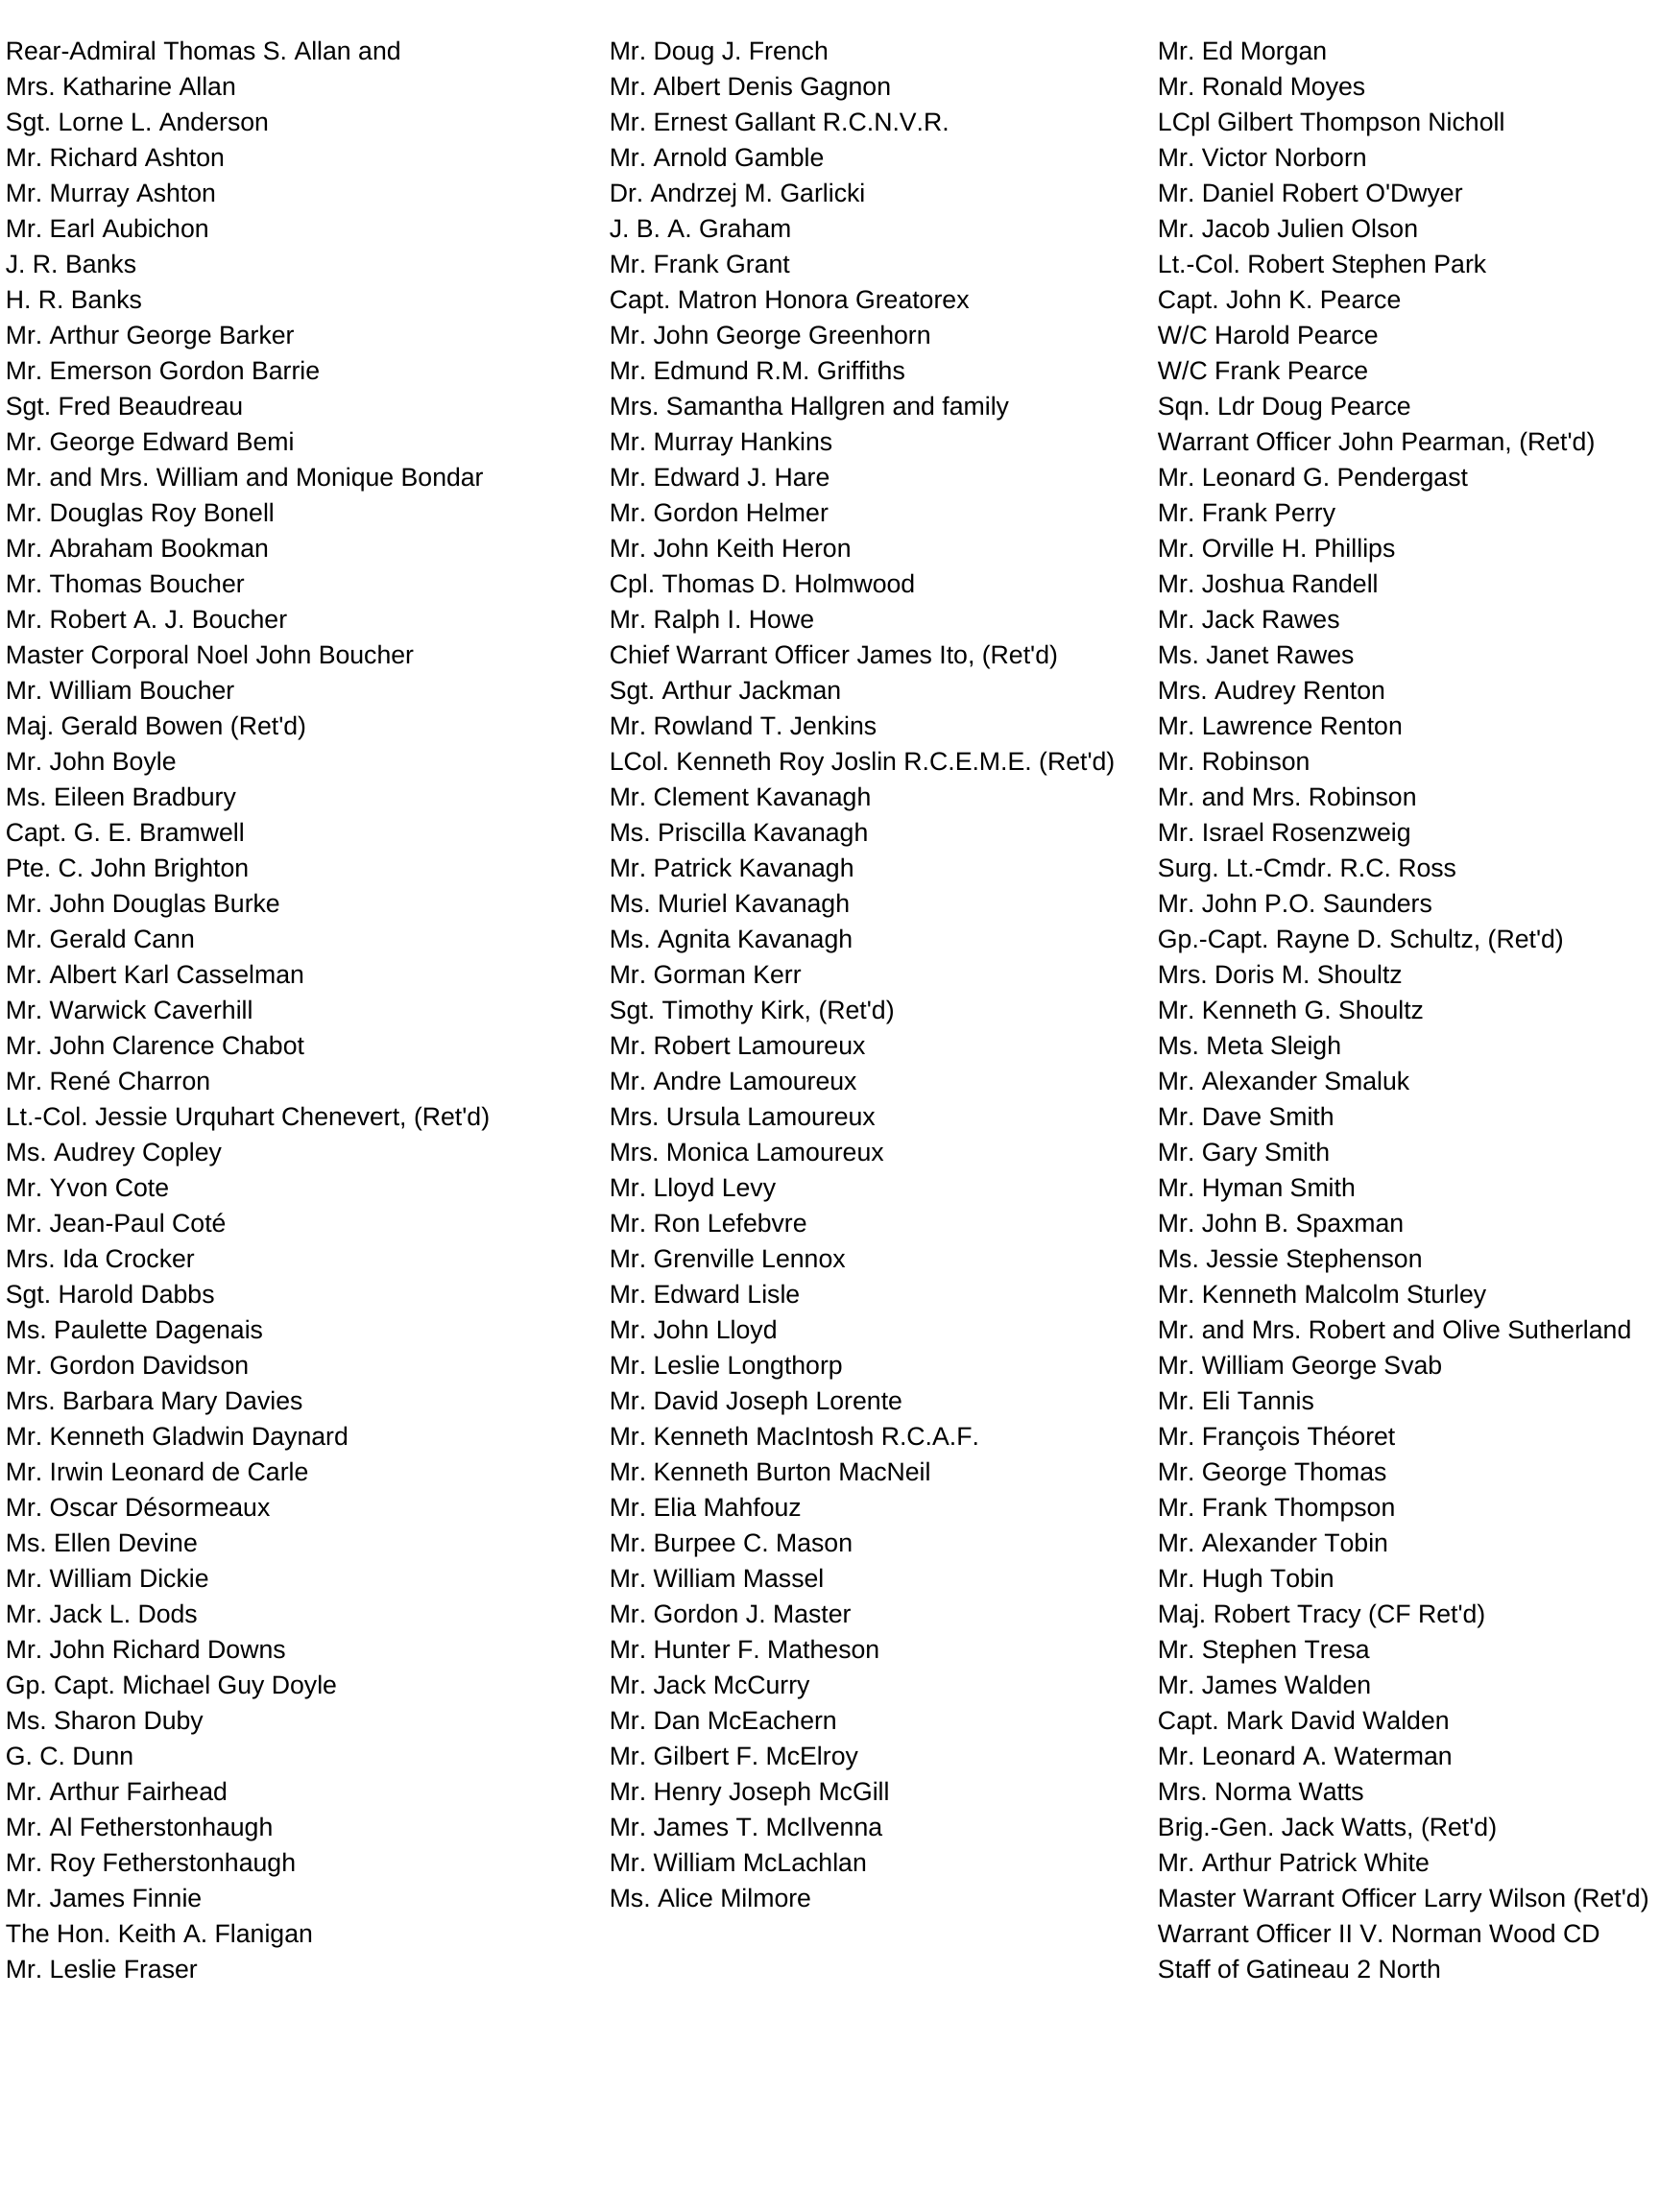 21Flag List of Tributes for Web (5).png